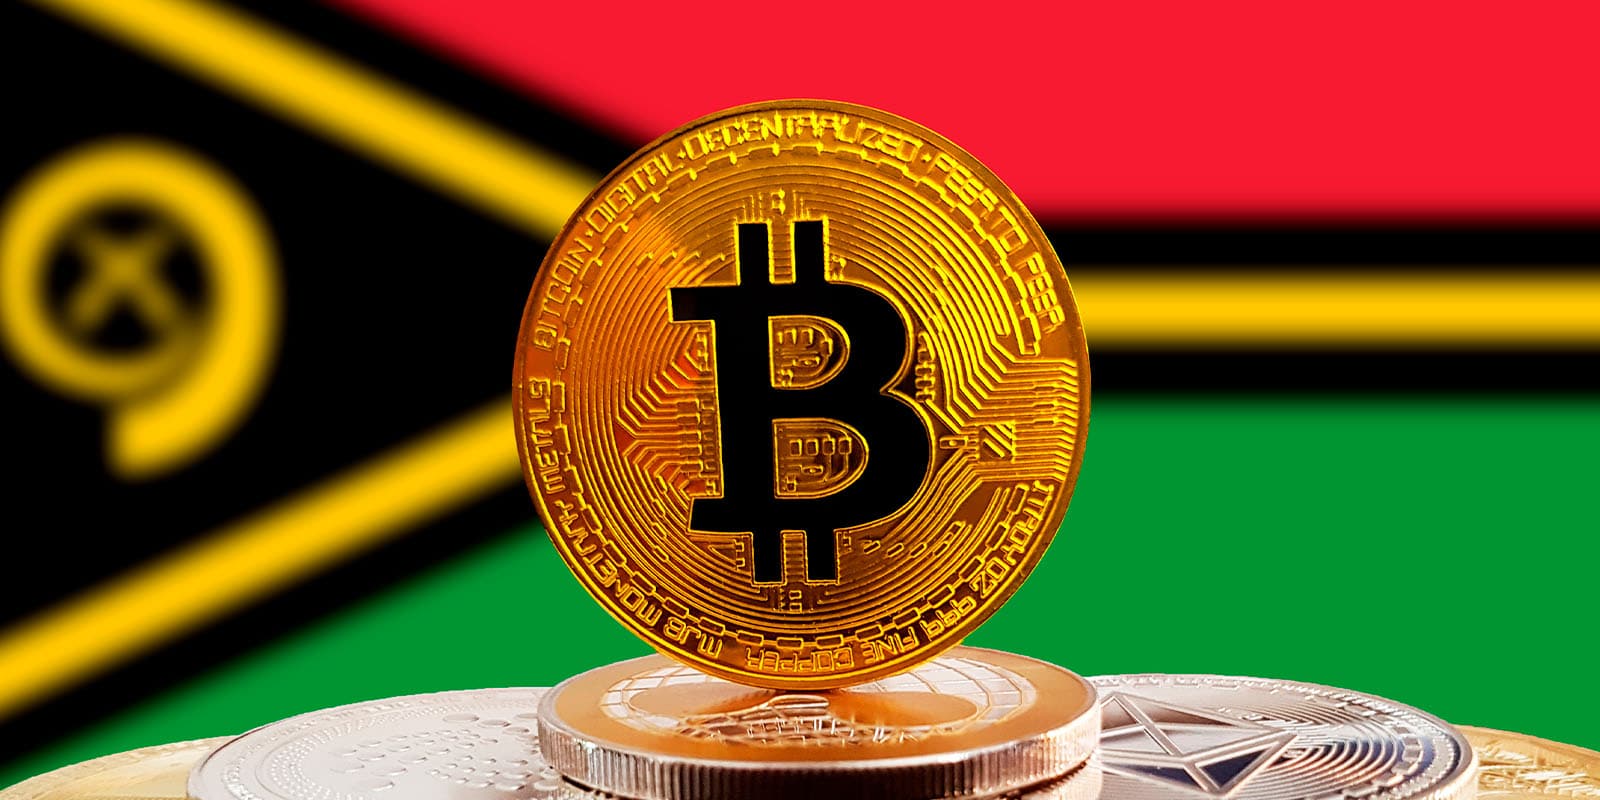 Vanuatu also allows crypto investors to pay agents in crypto-currencies.